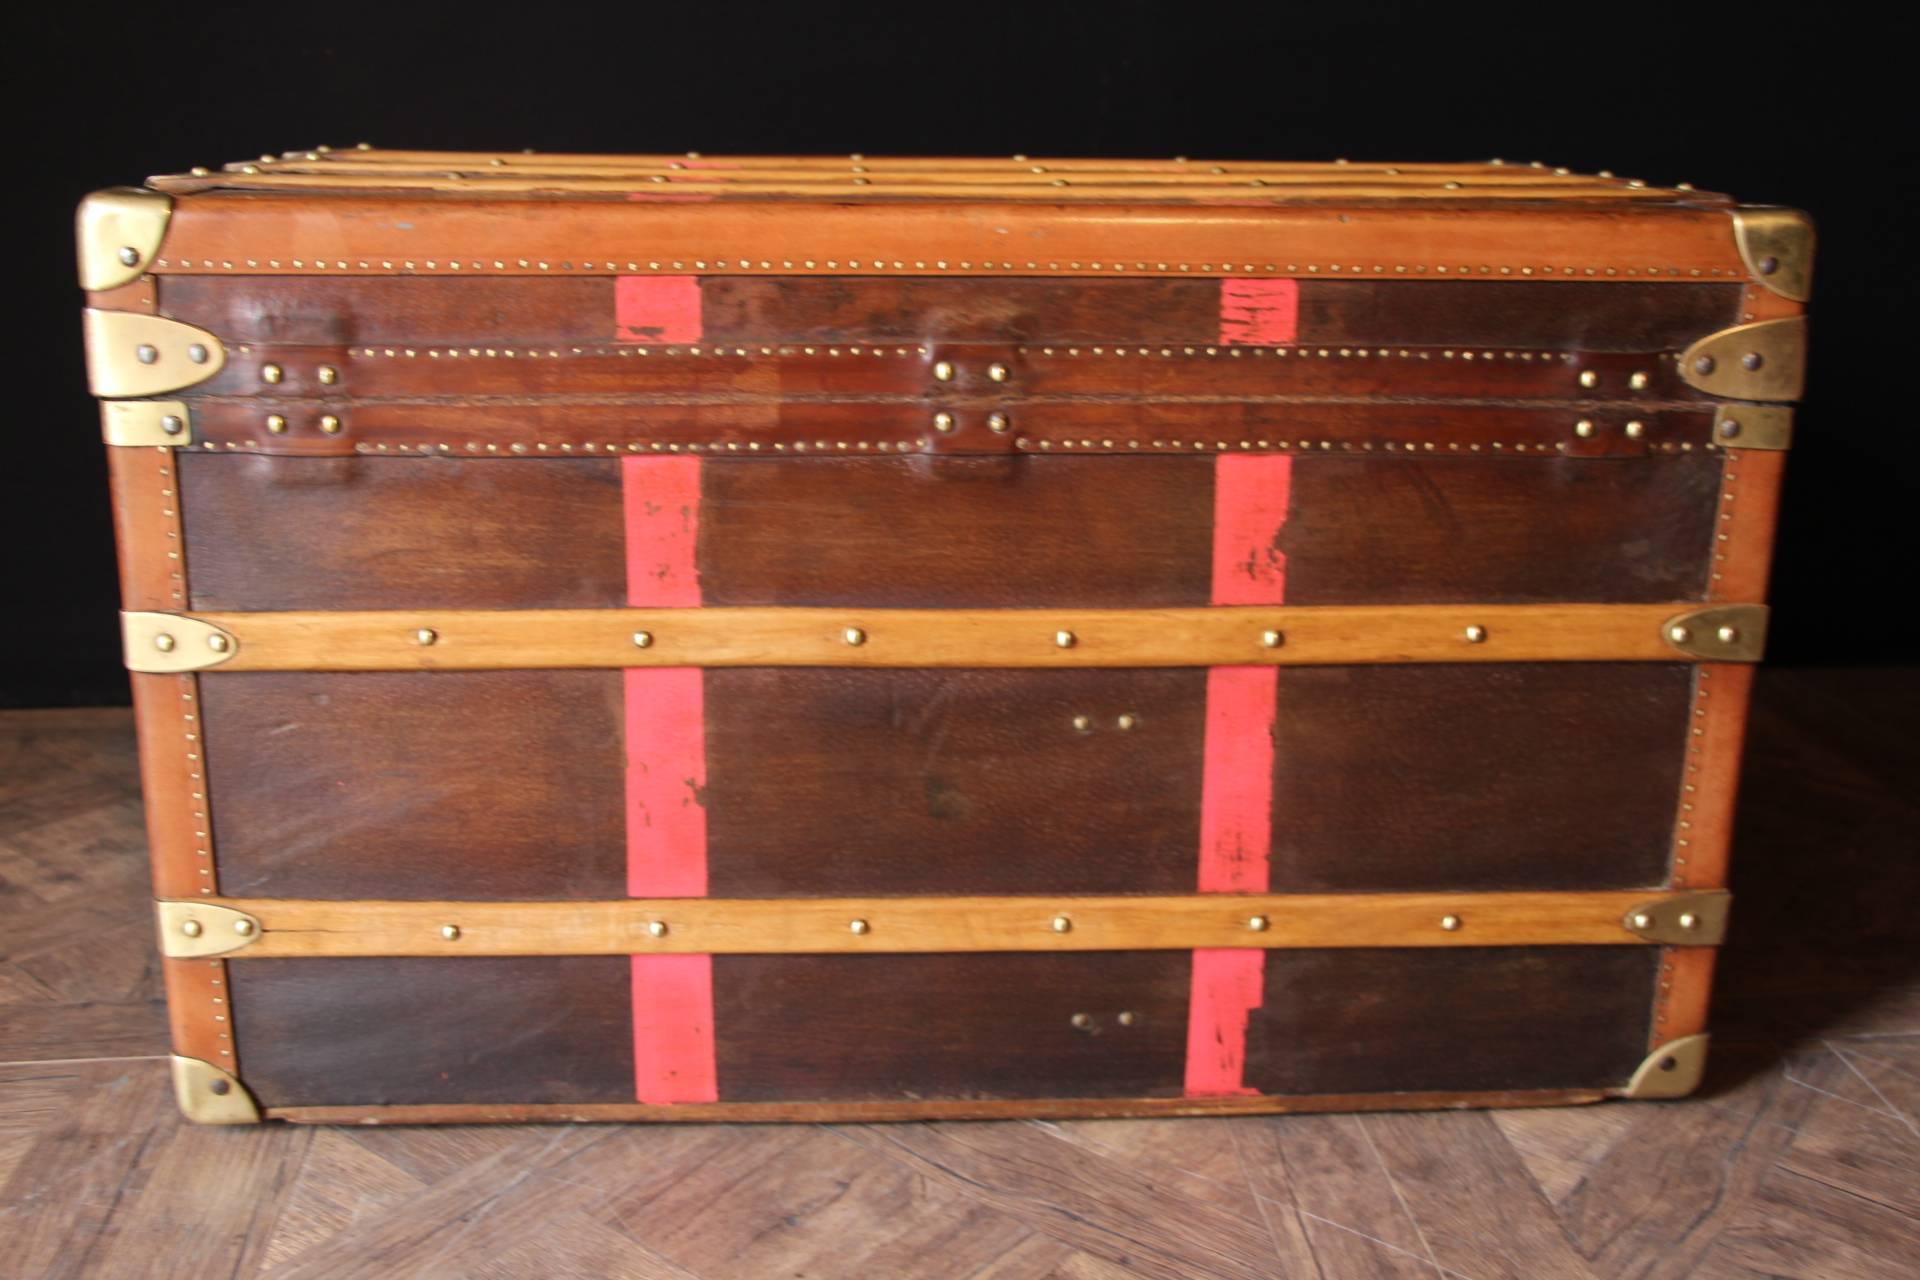 This beautiful Moynat steamer trunk features canvas, brass corners, studs and locks and large leather side handles. It has got a very warm patina.
Its interior has been perfectly relined by a professional and is extra clean so that it could be used